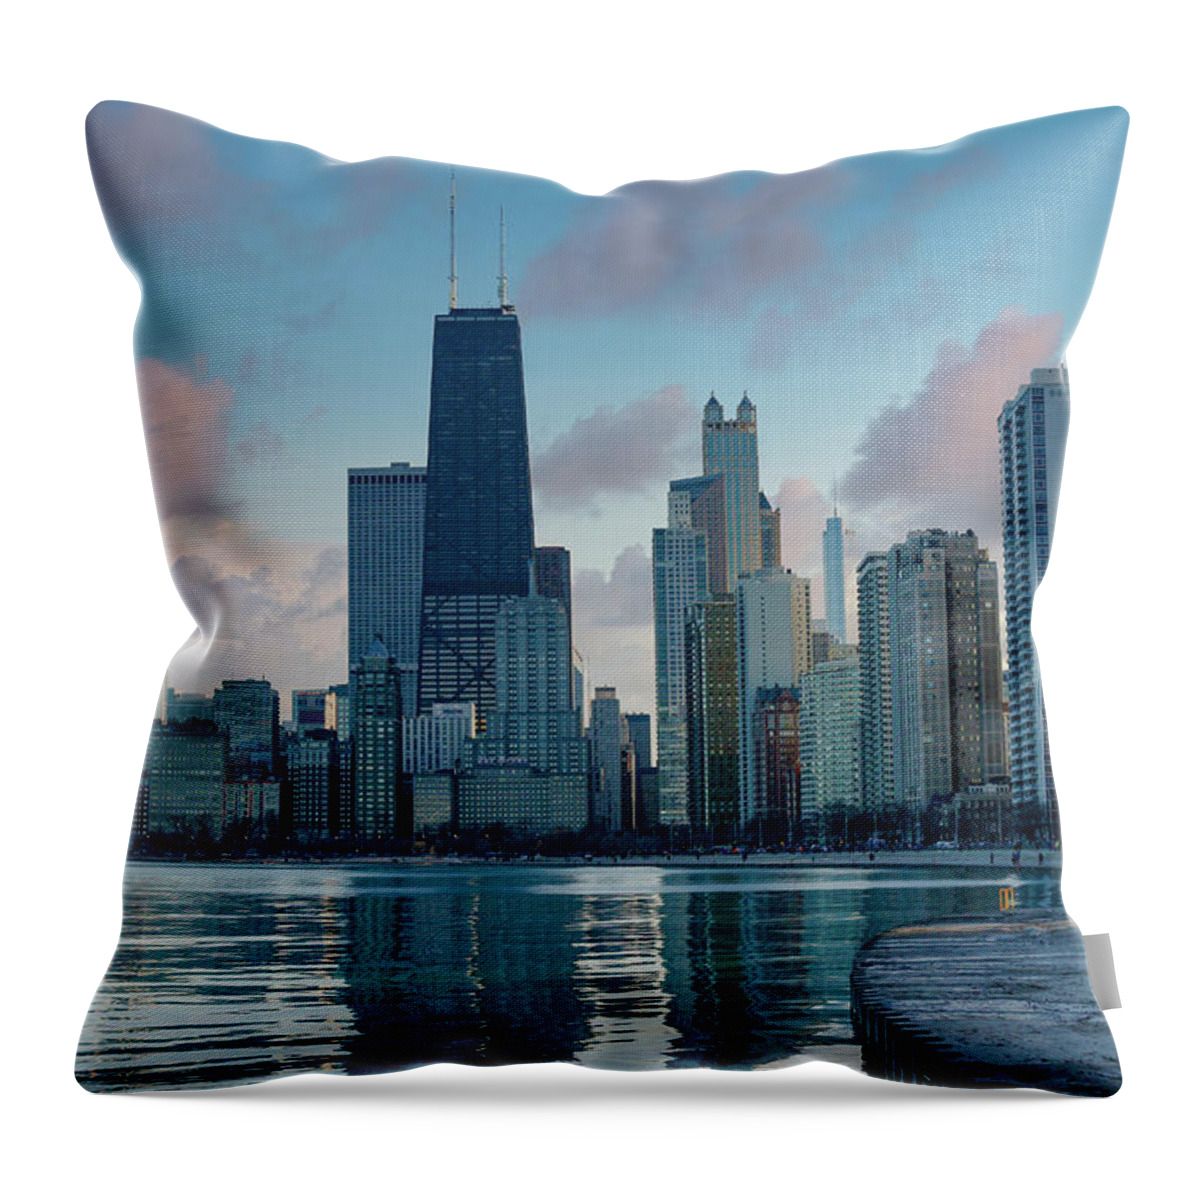 Chicago Throw Pillow featuring the digital art Chicago Lakefront Dusk by Todd Bannor